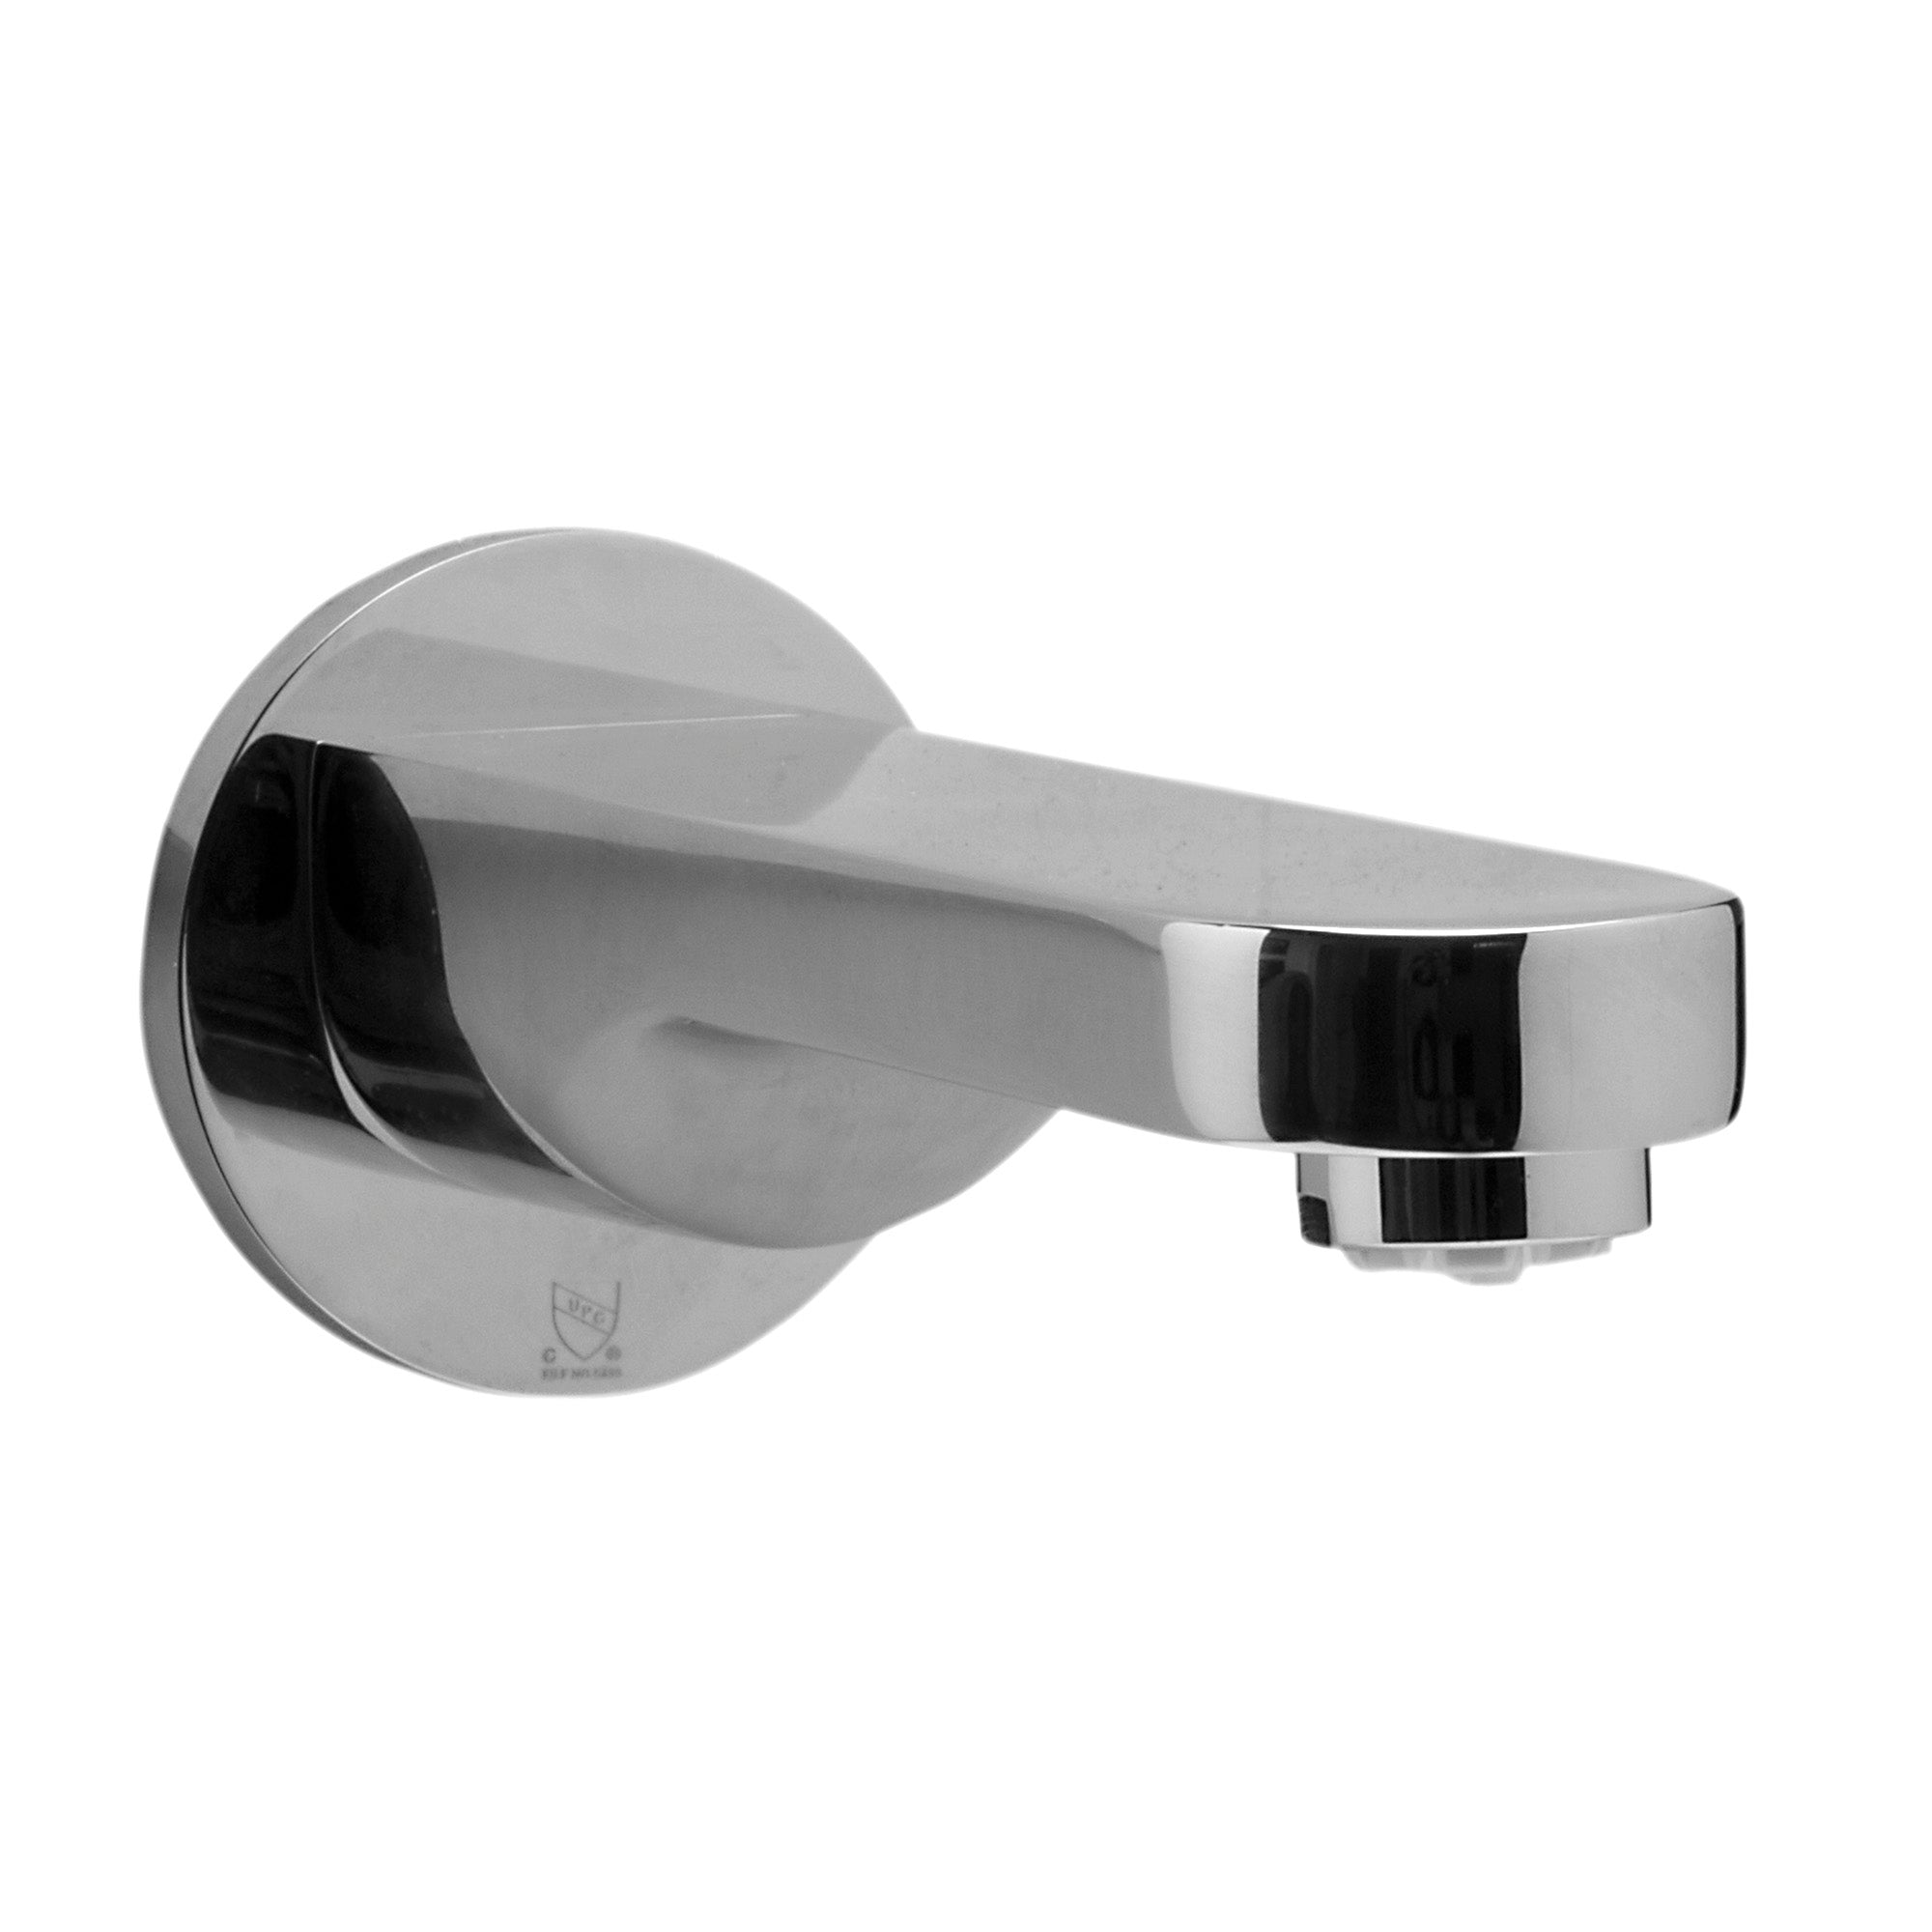 ALFI AB2201 Wallmounted Tub Filler Bathroom Spout Solid brass construction coated with polished chrome in a white background